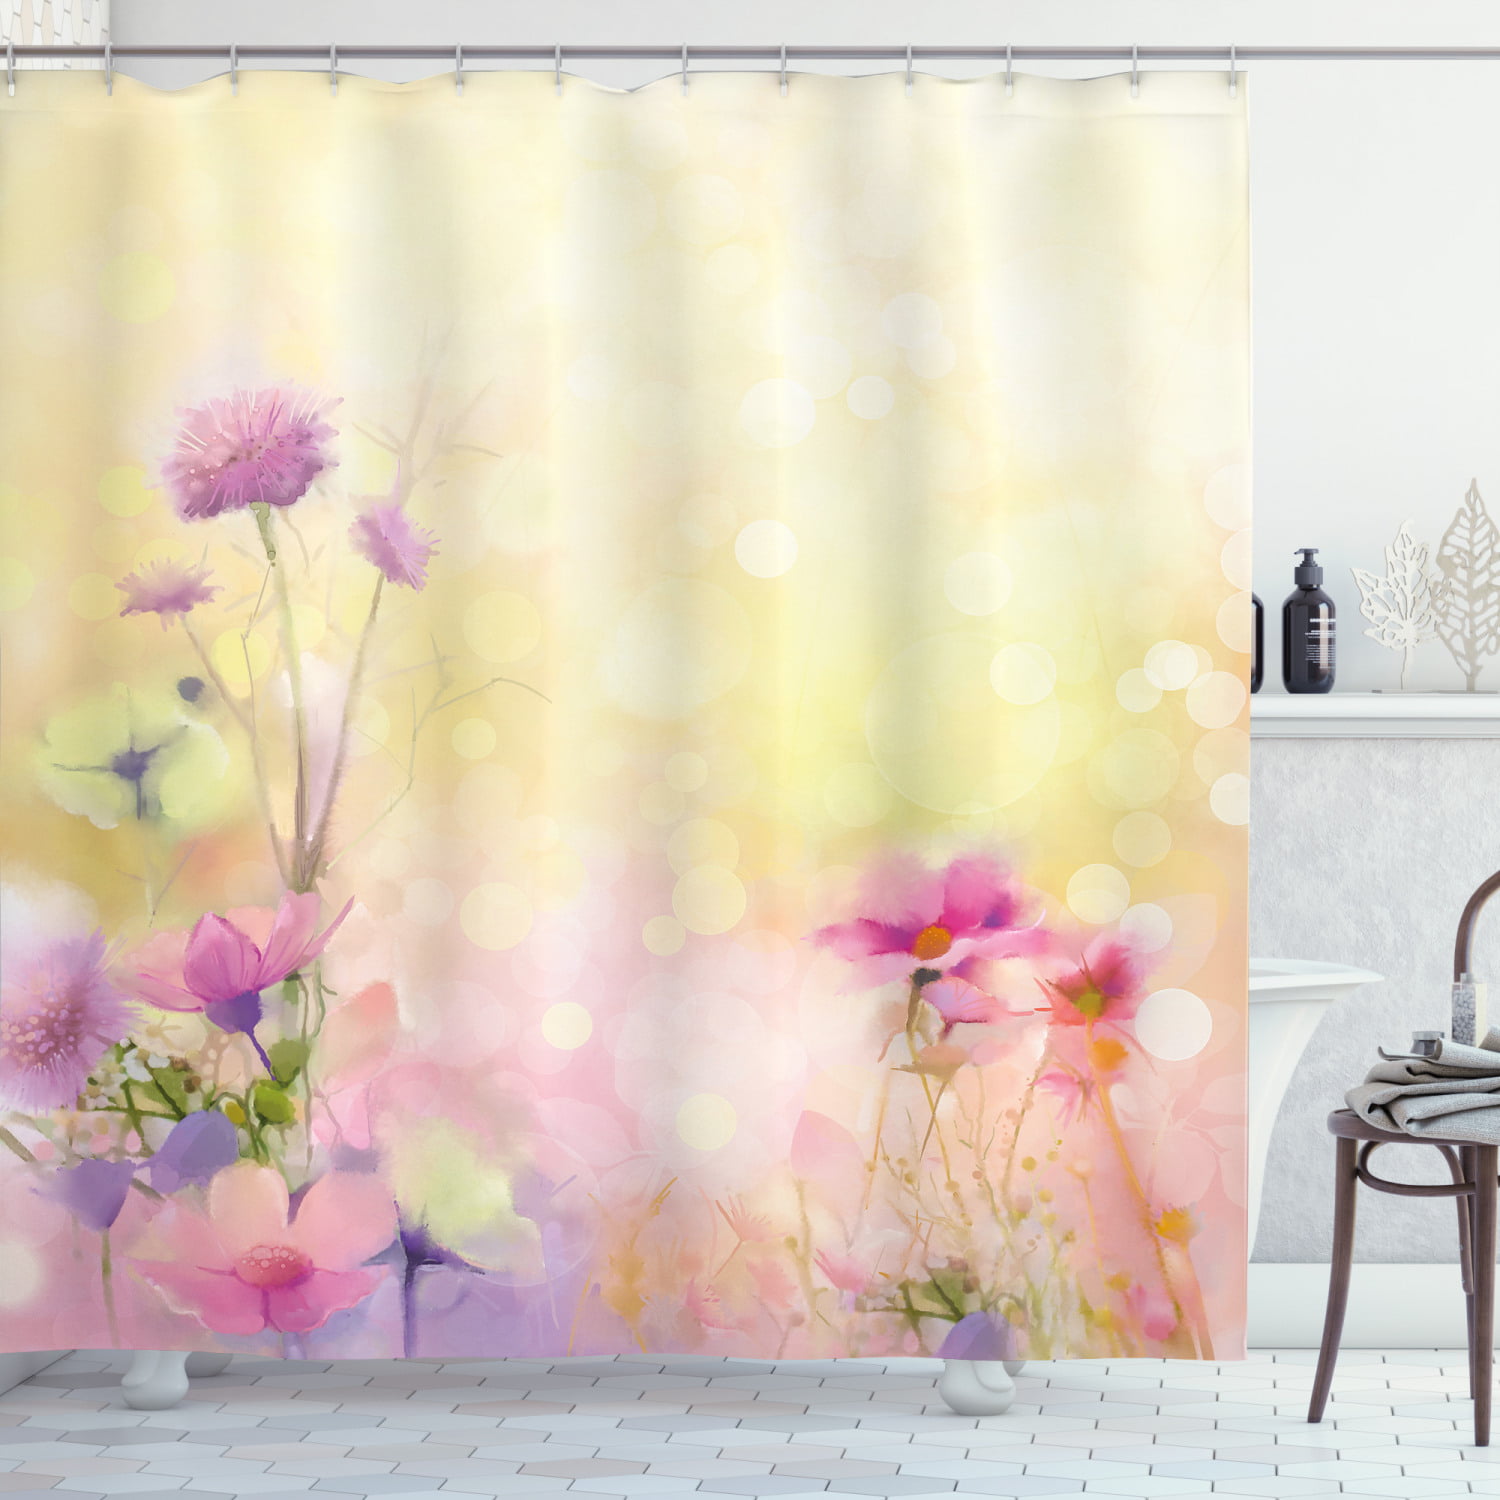 Colorful Shower Curtain Parrots Iris and Roses Print for Bathroom 